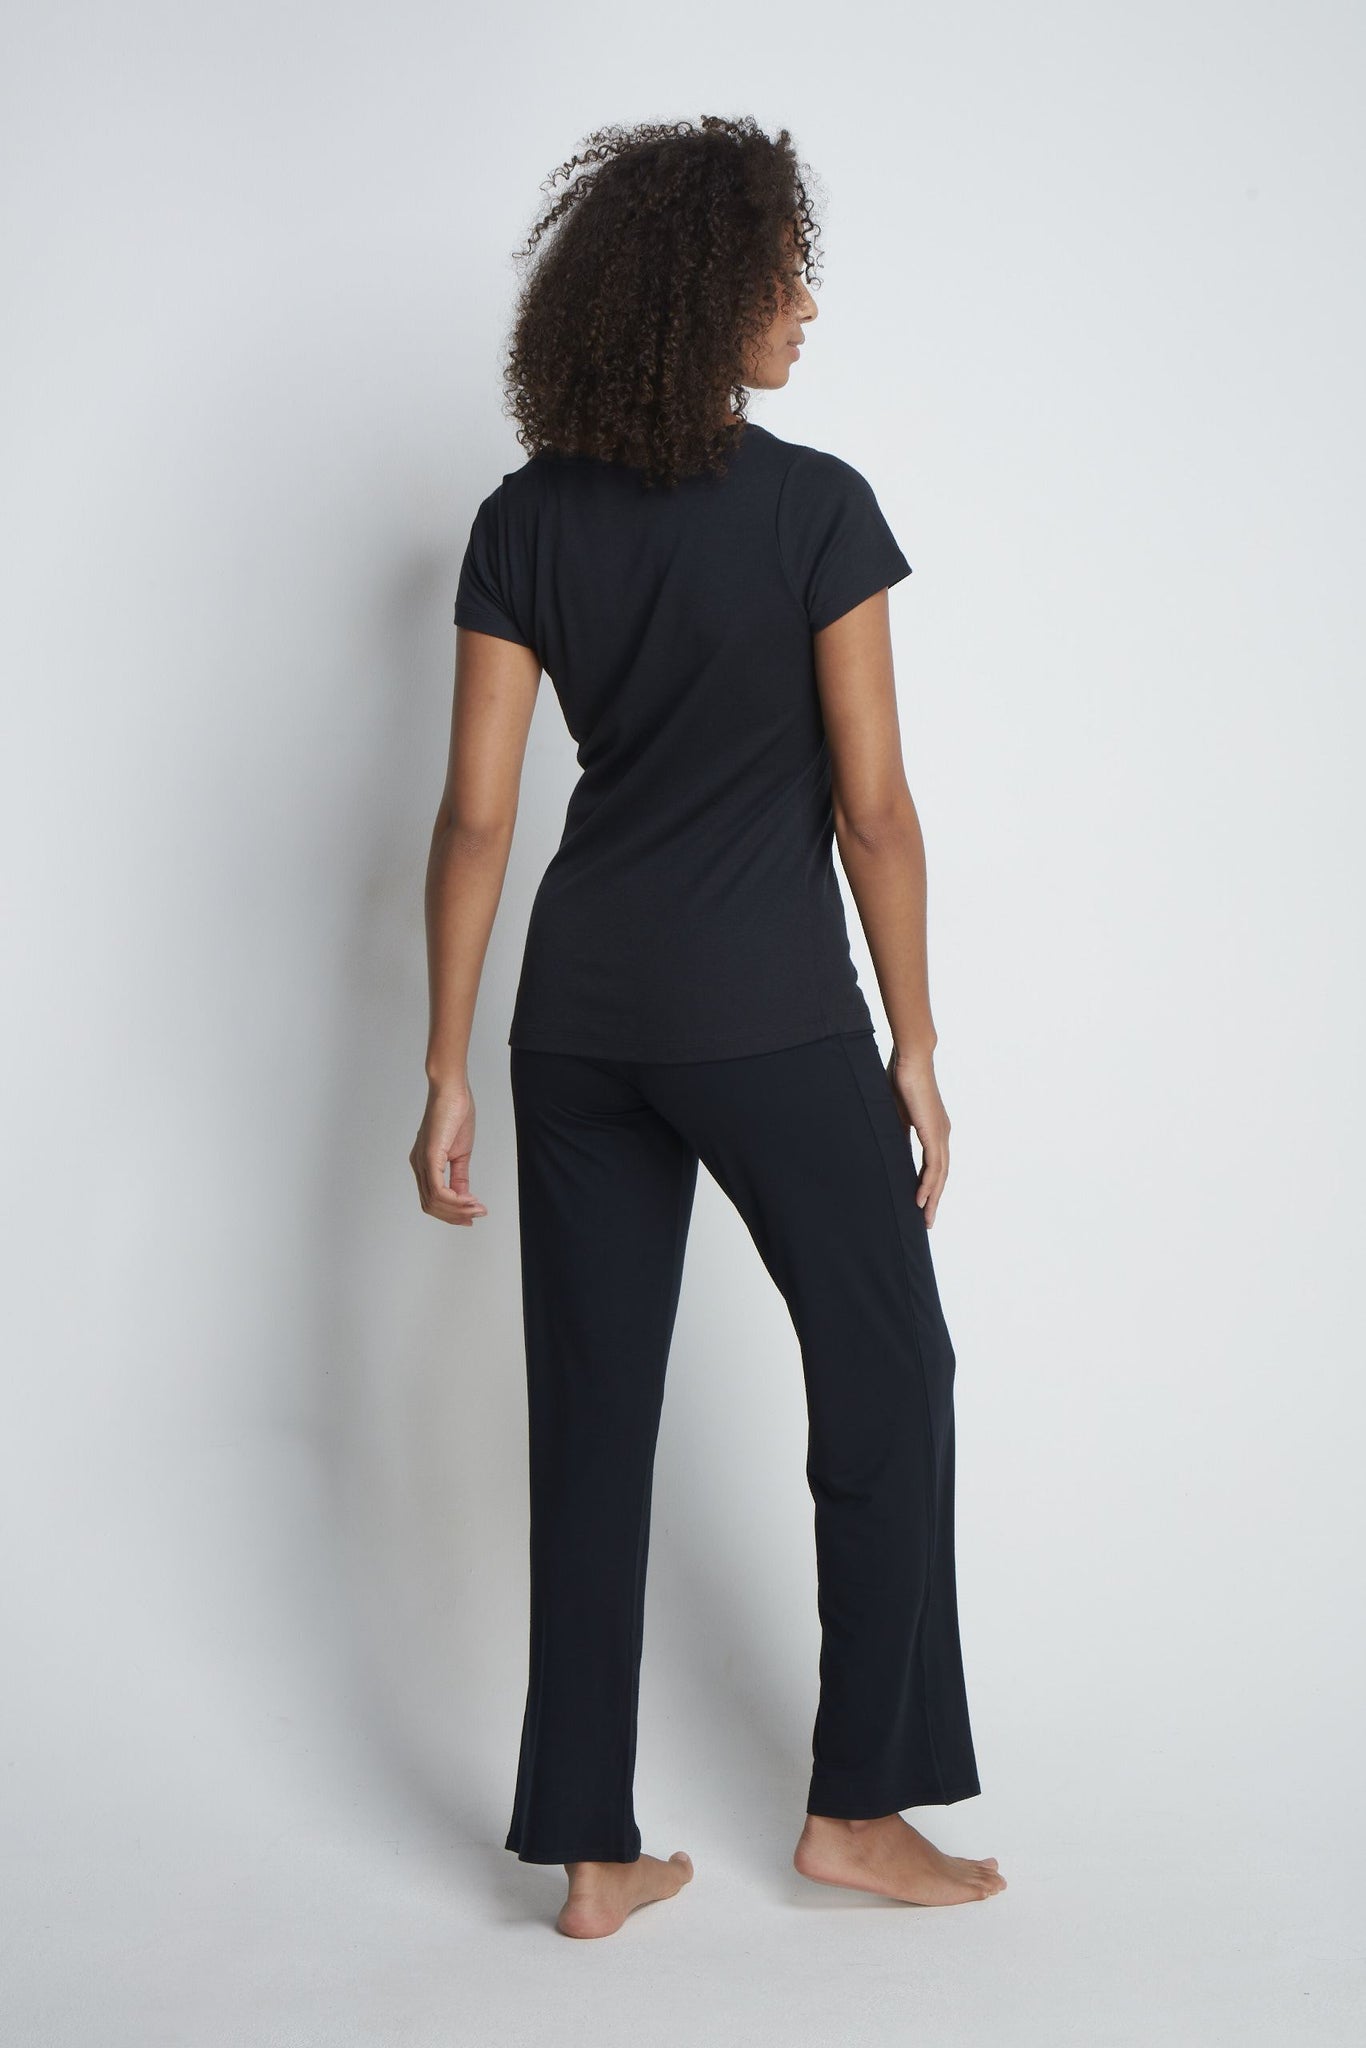 Women's High Quality Black Lounge Trousers - Cozy Lounge Trousers - Soft and Comfortable Lounge Trousers - Warm Black Lounge Trousers